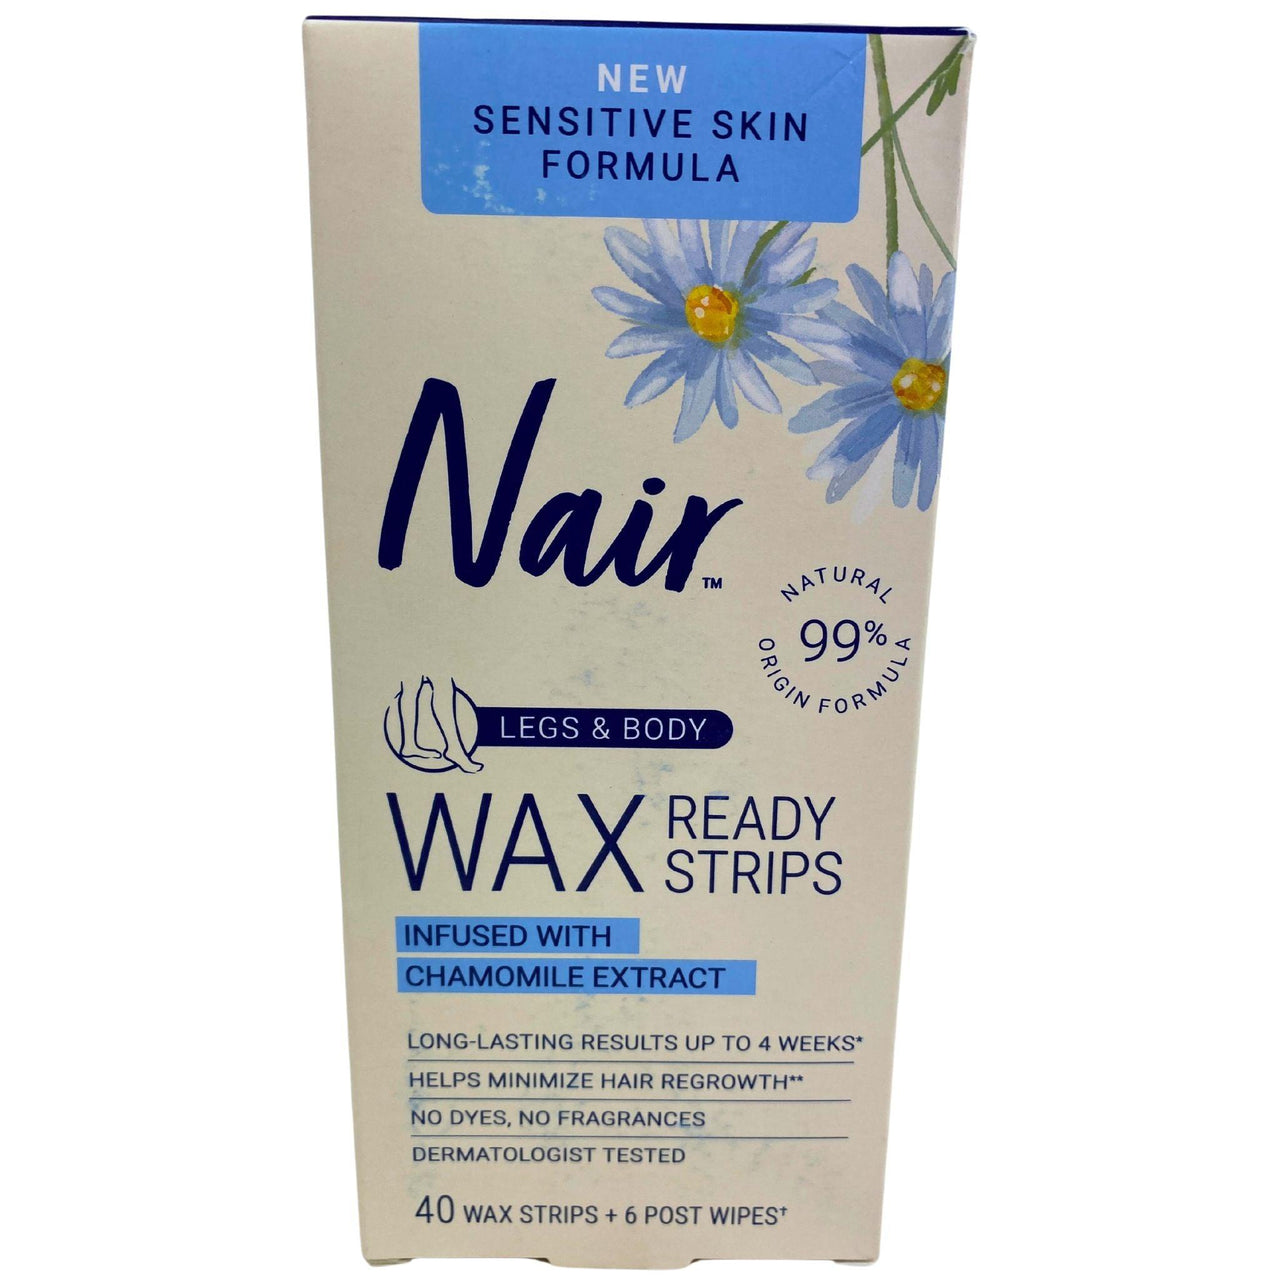 Nair New Sensitive Skin Formula Legs & Body Wax Ready Strips Infused With Chamomile Extract (50 Pcs Lot) - Discount Wholesalers Inc